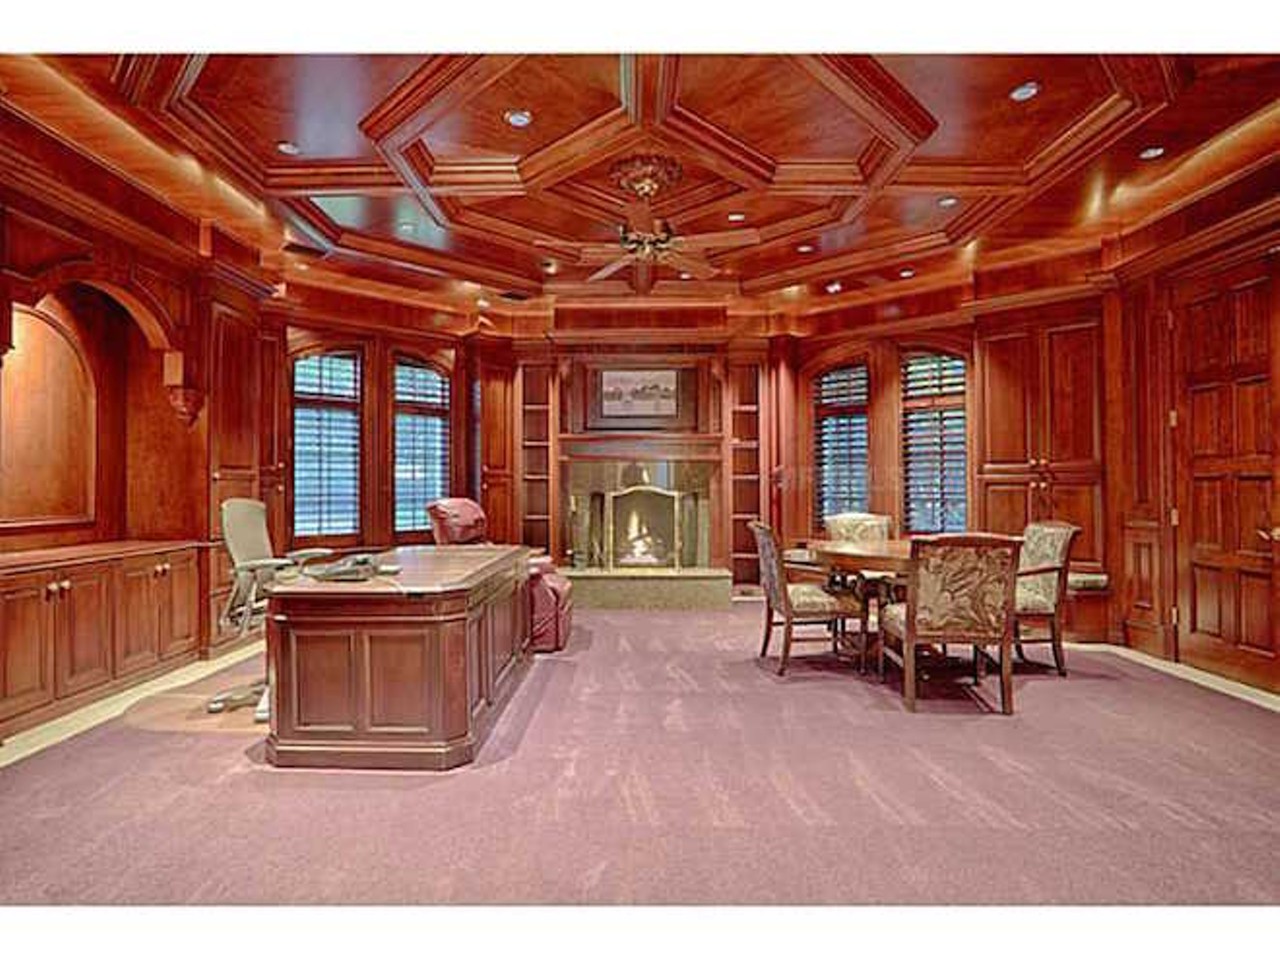 It also has a very ornate wood-paneled office with some rather unattractive mauve carpeting that has recently been vacuumed.